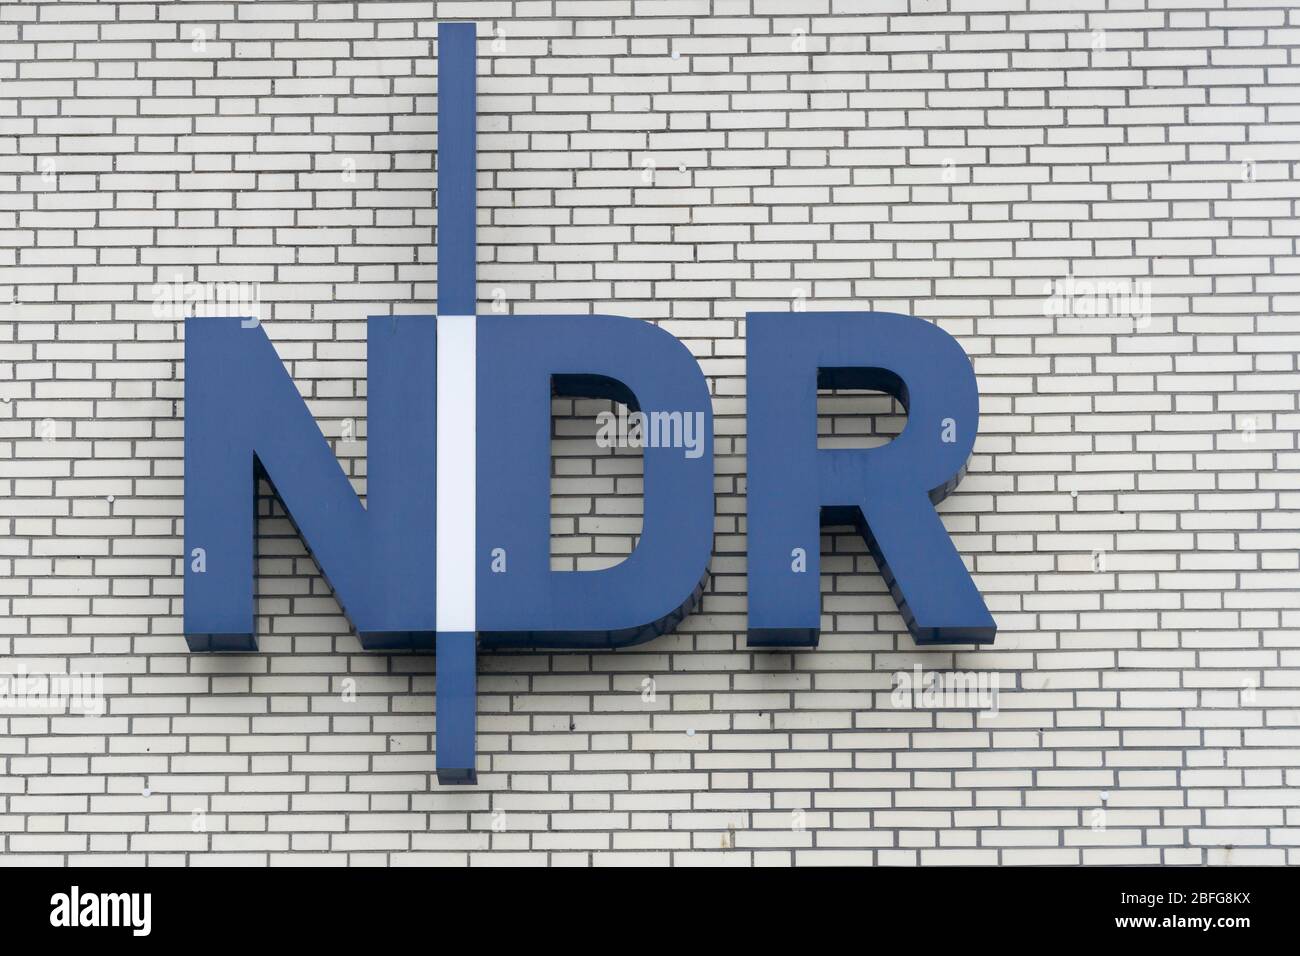 Facade with lettering NDR, Kiel, Schleswig-Holstein, Germany Stock Photo